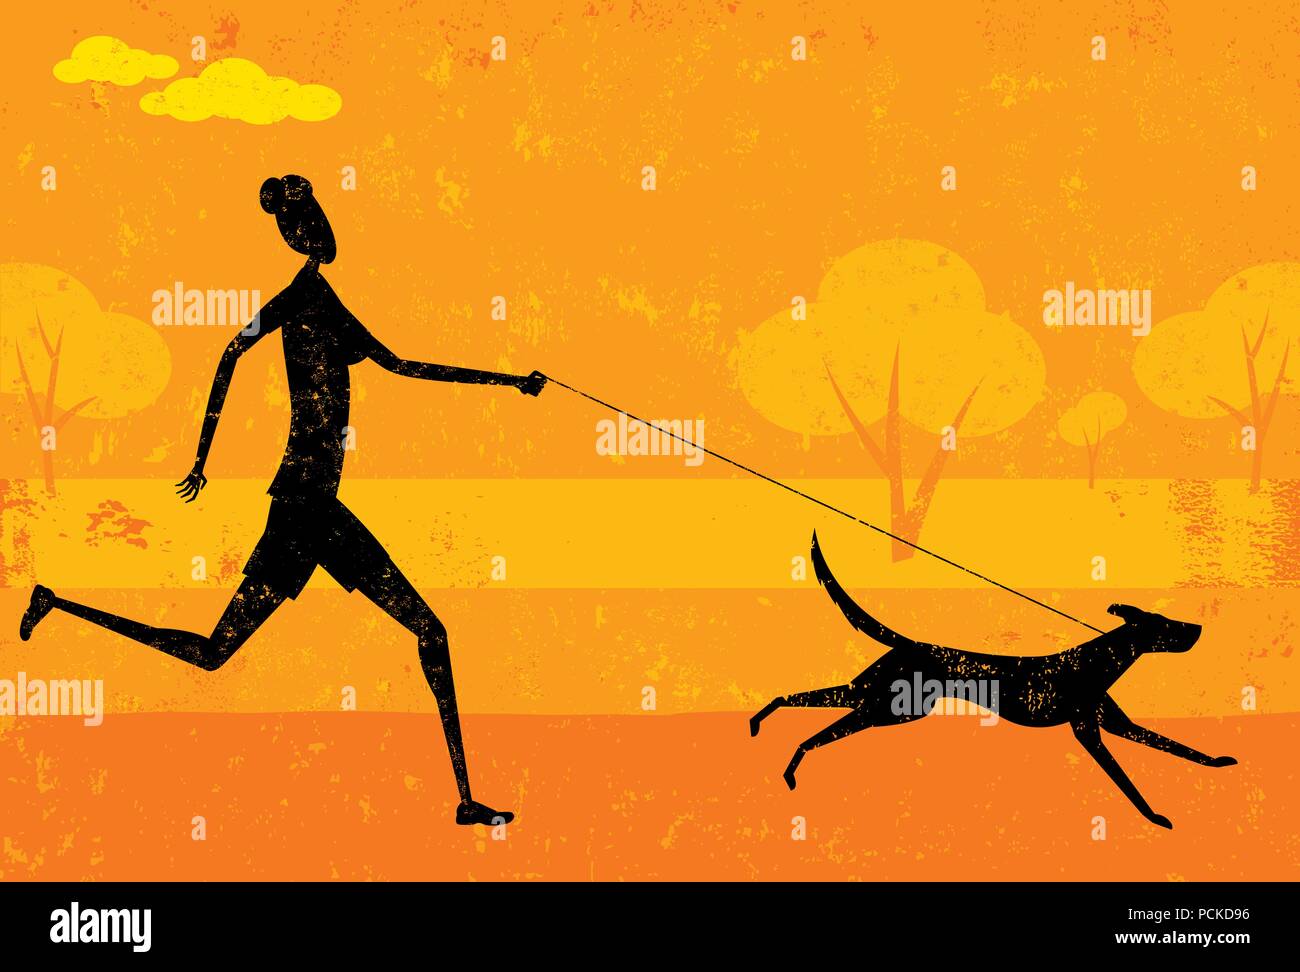 Running with dog A woman running with her dog over an abstract park background. The woman & dog and background are on separate labeled layers. Stock Vector